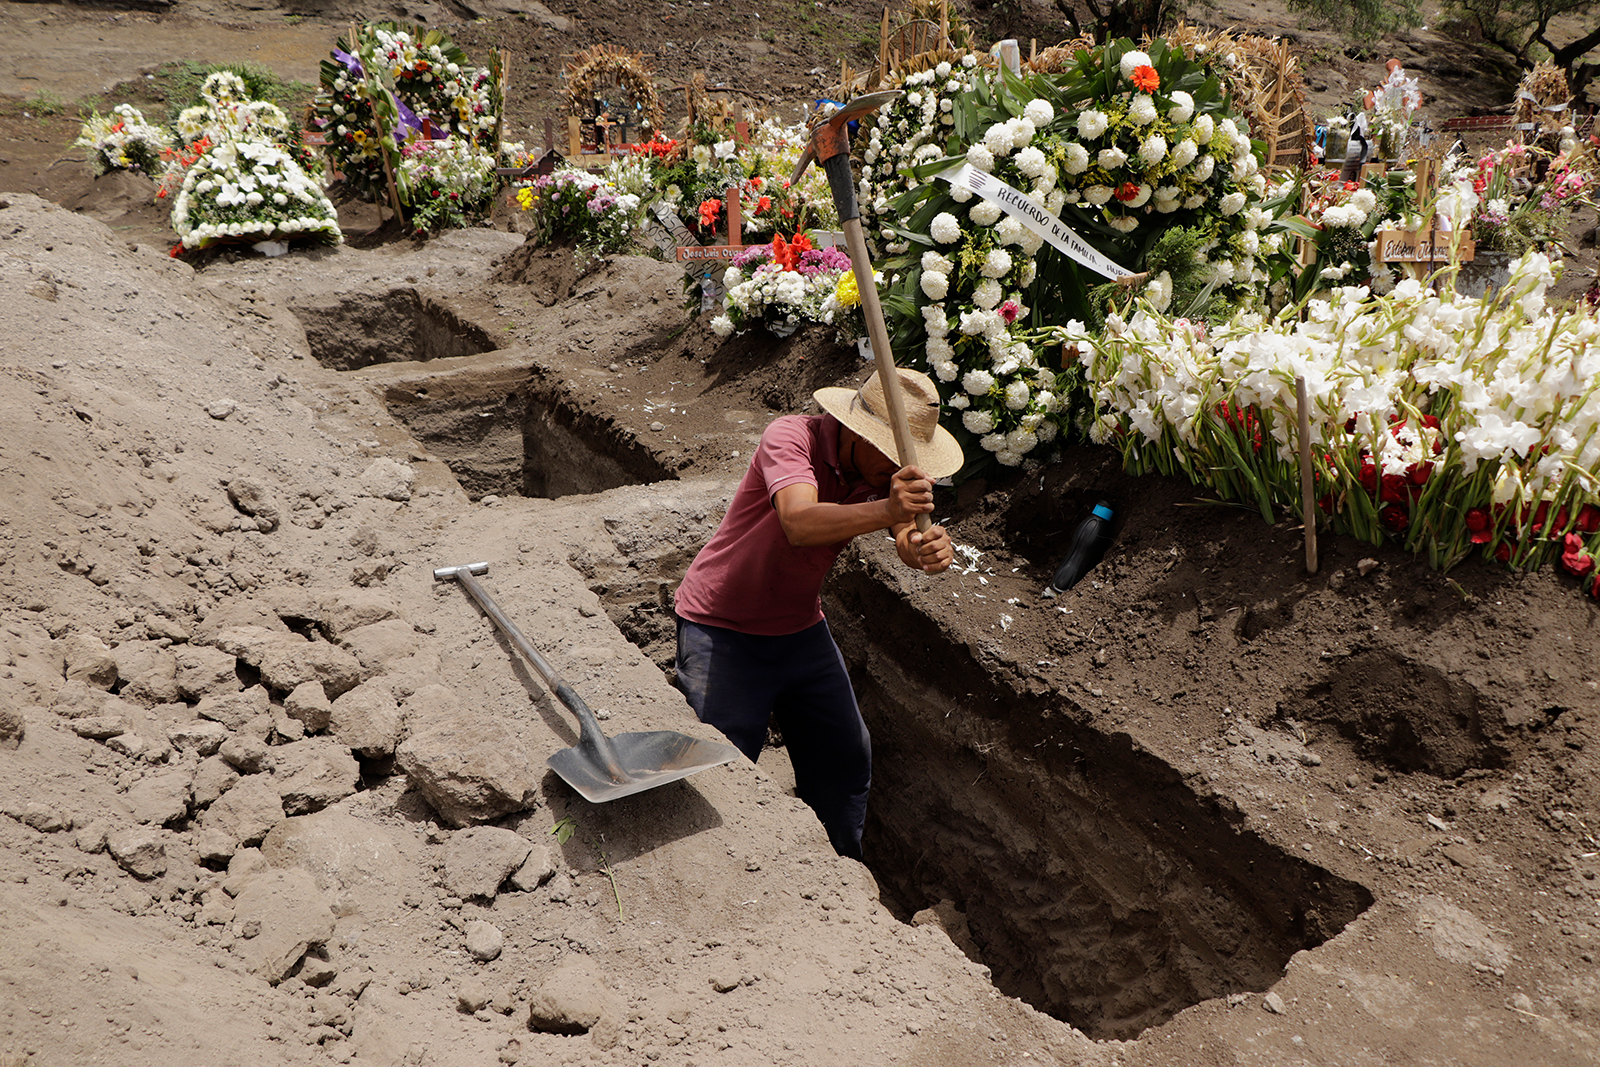 A man digs graves in the Xico-Chalco Civil Pantheon, State of Mexico, on June 26.